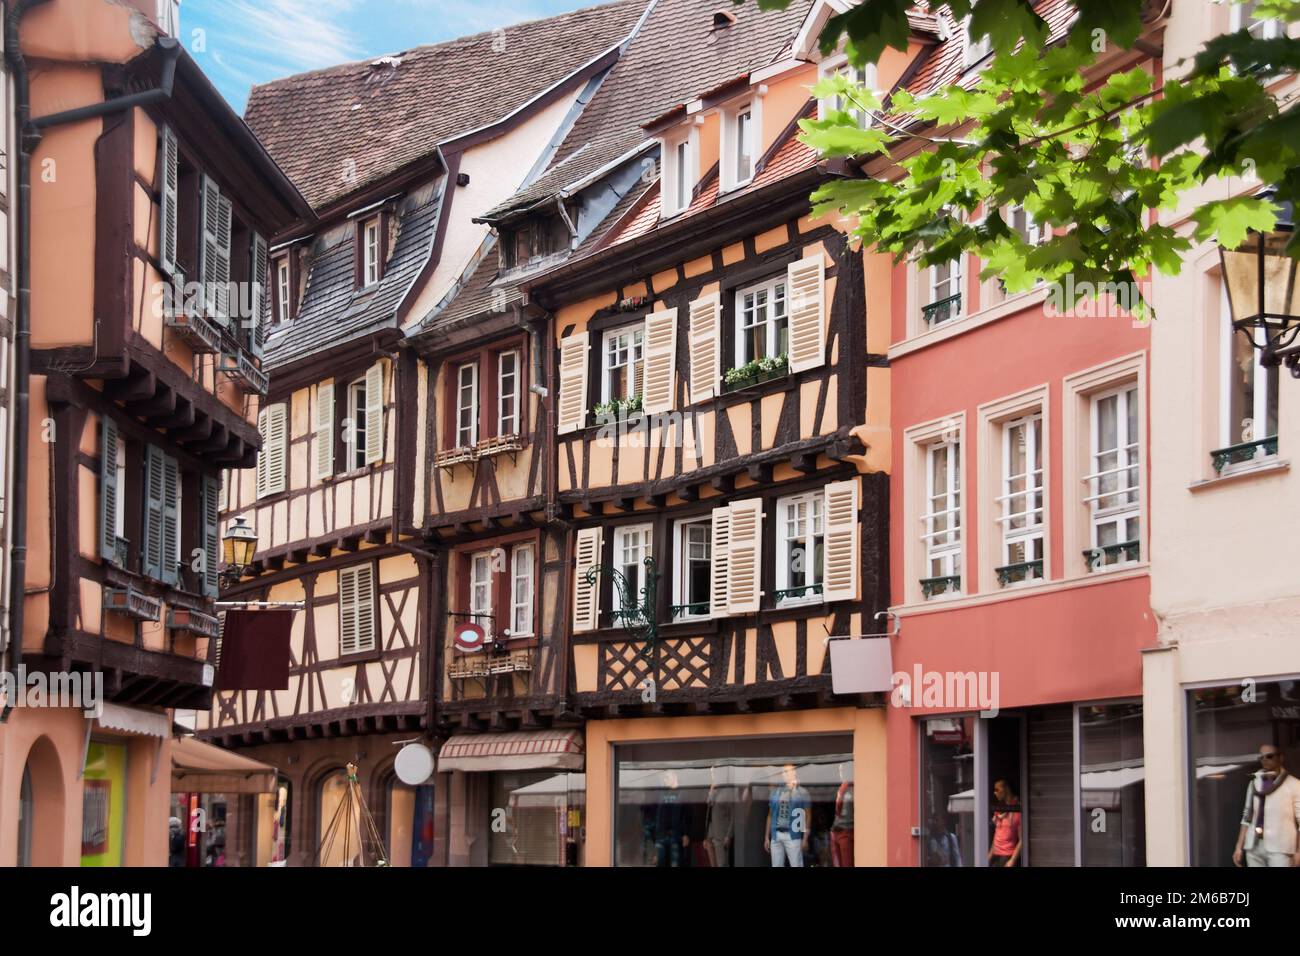 Traditional Timbered houses in Alsace regions, France Stock Photo